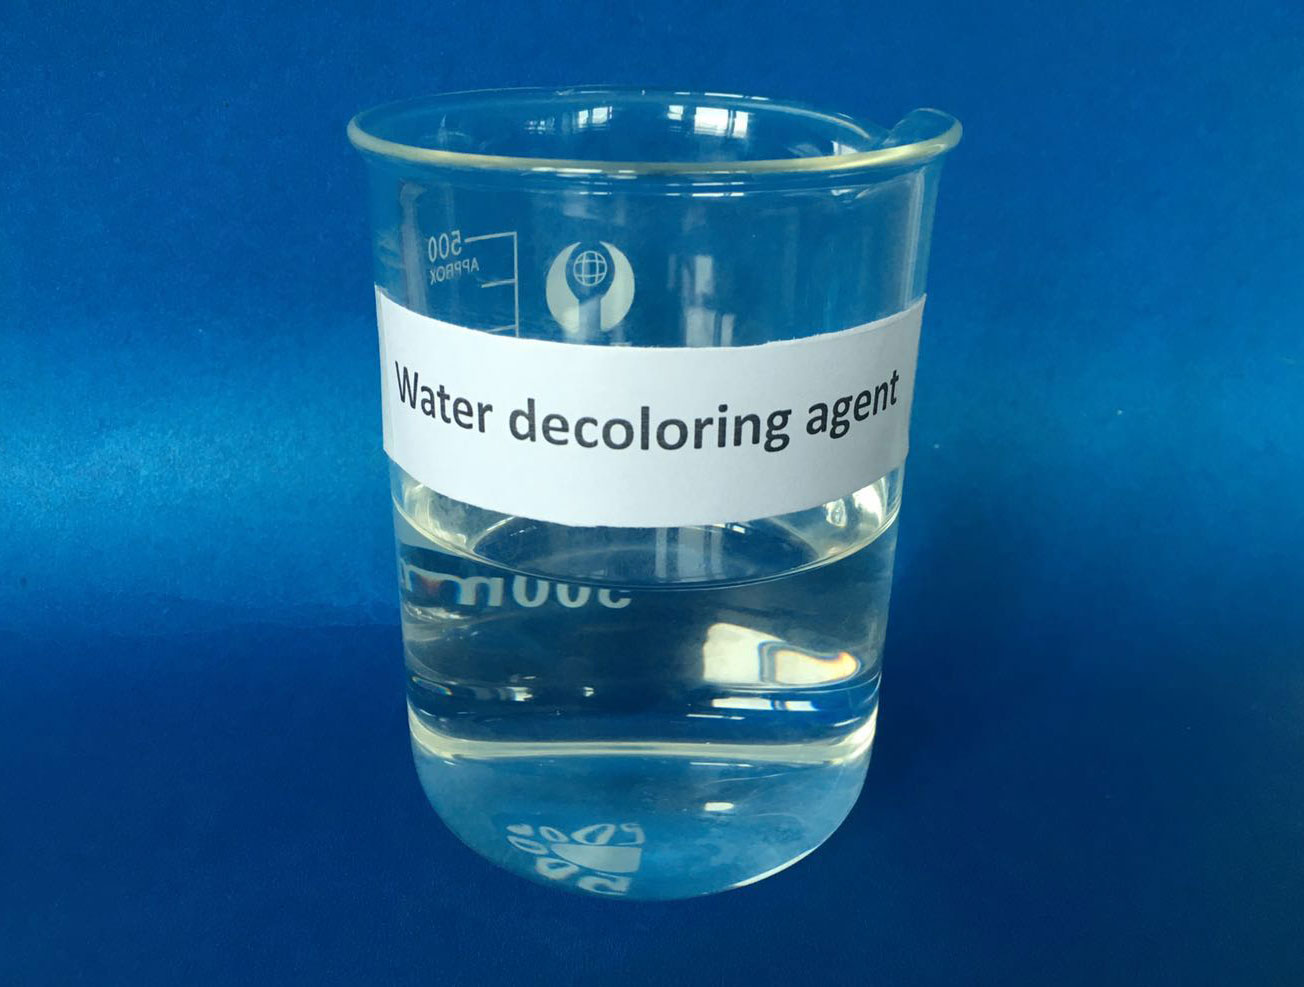 Water decoloring agent